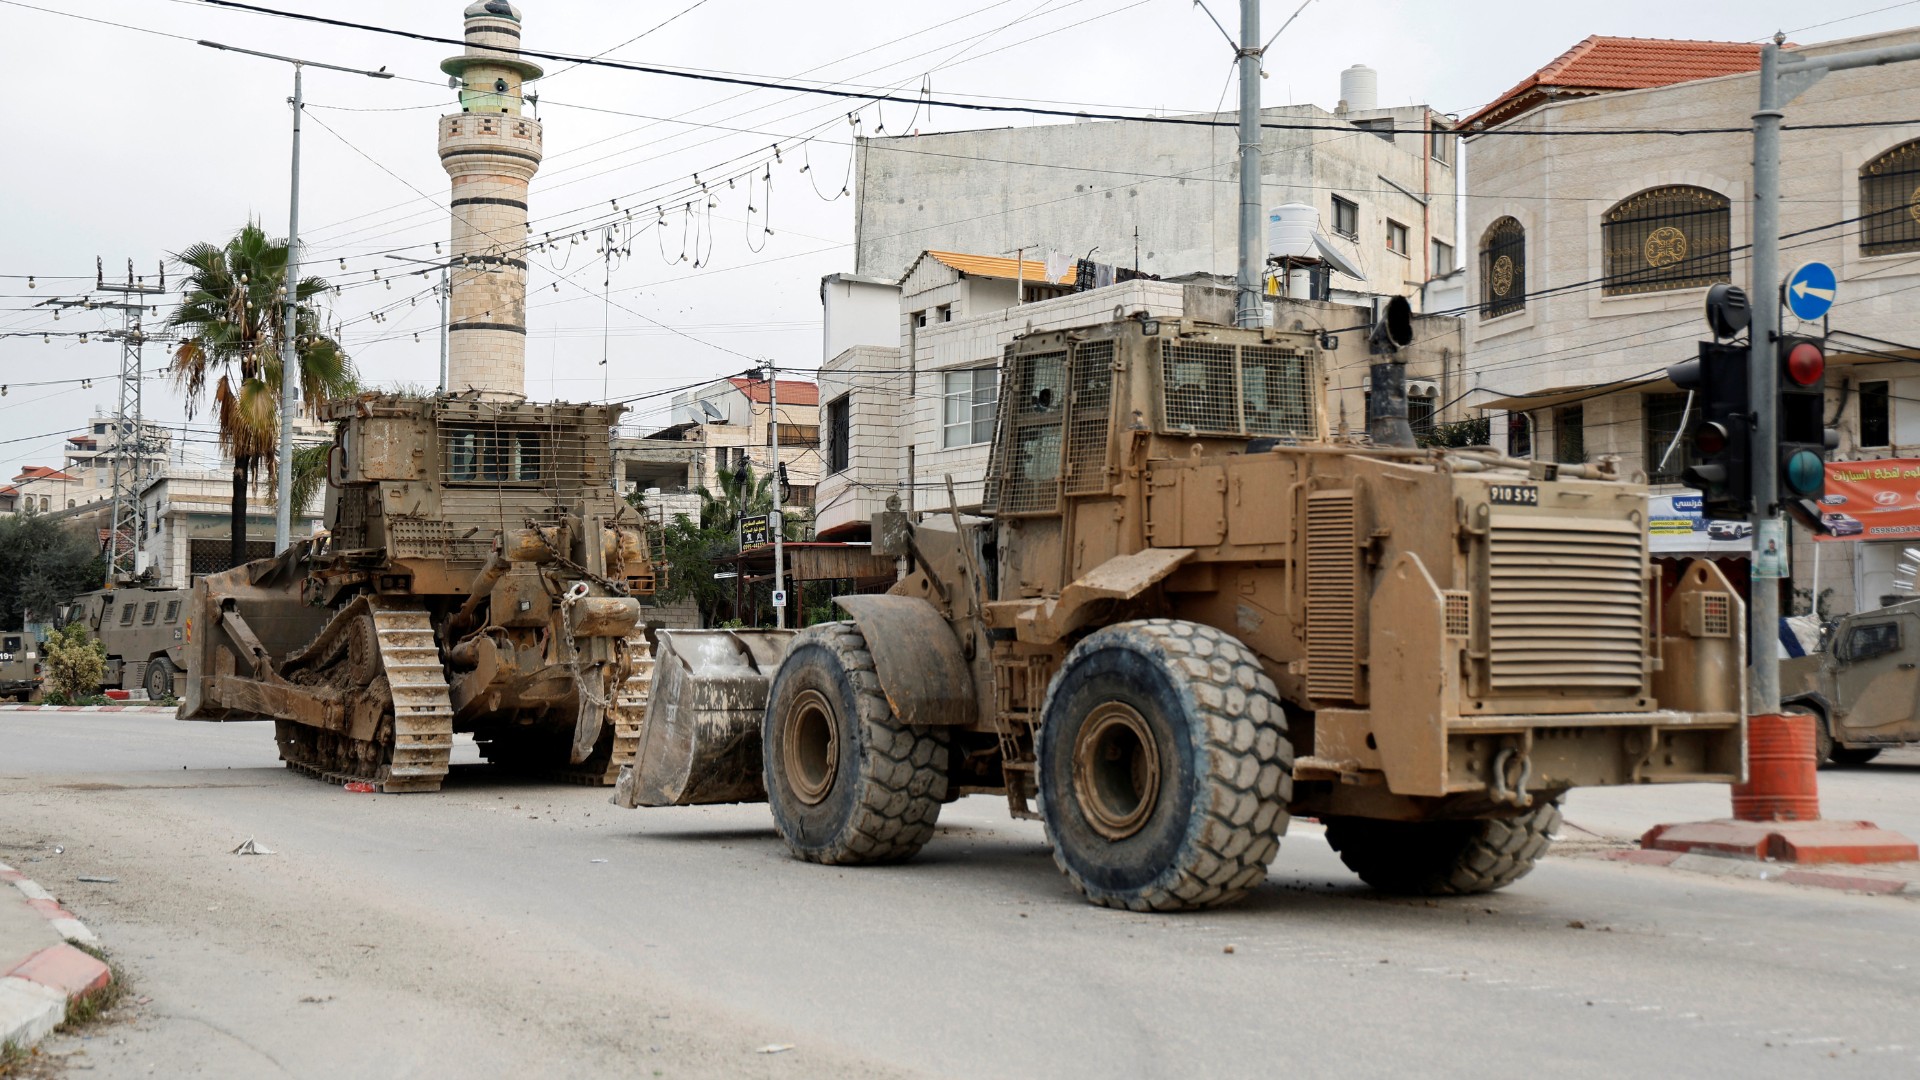 Israeli forces launched a raid in Tulkarm, in the Israeli-occupied West Bank on Wednesday. /Raneen Sawafta/Reuters